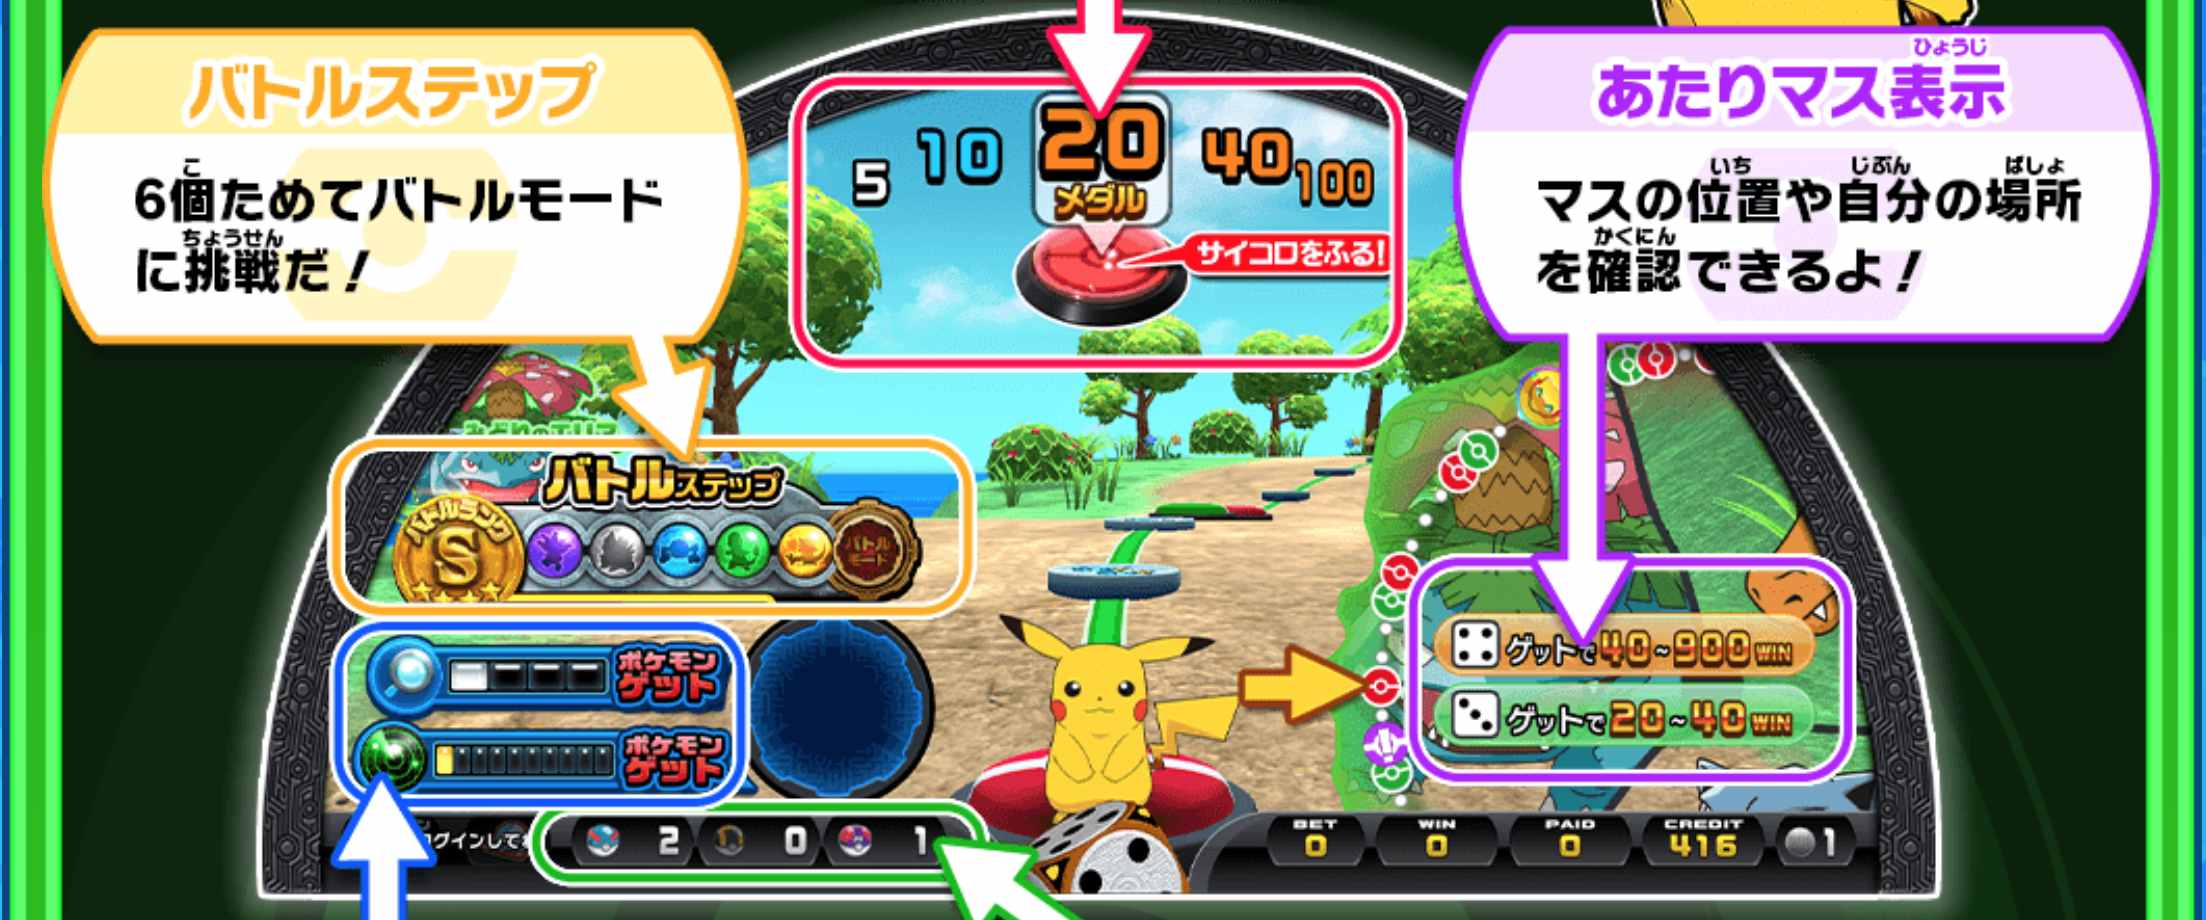 A new Pokémon medal game from Sega coming to Japanese arcades this month